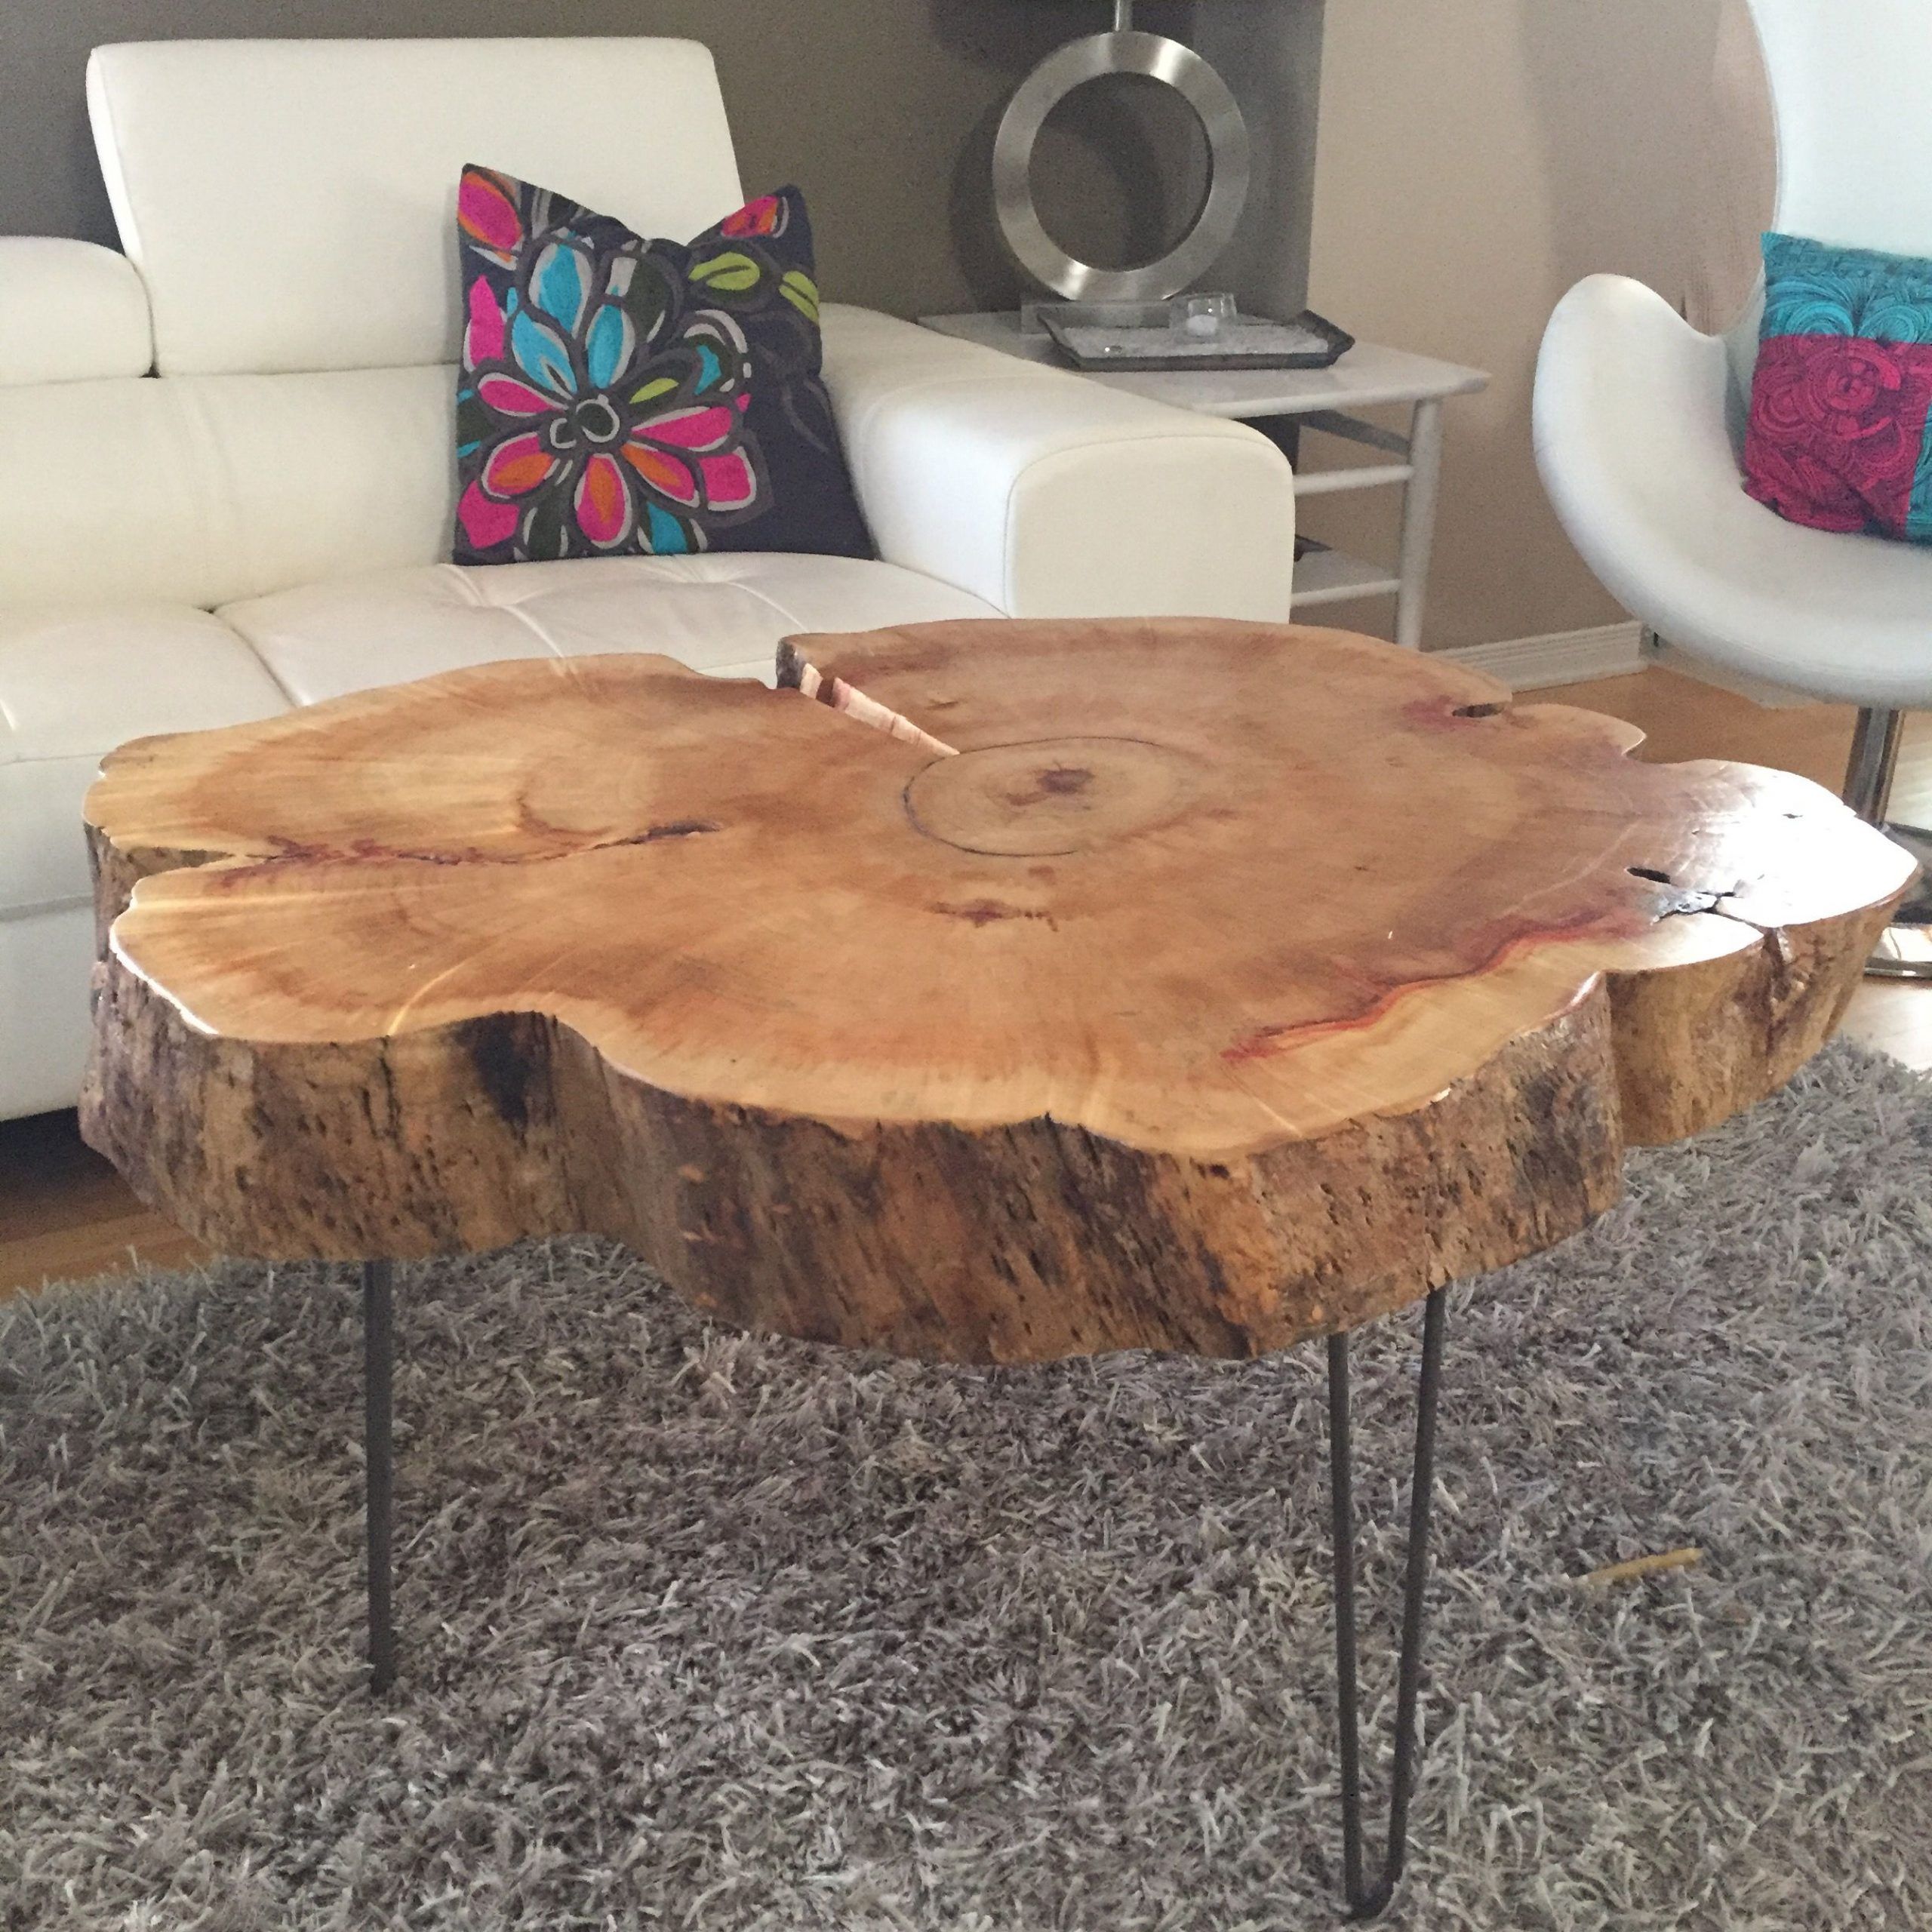 2020 Pin On Rough Cut Build Ideas In Oak Wood And Metal Legs Coffee Tables (View 5 of 10)